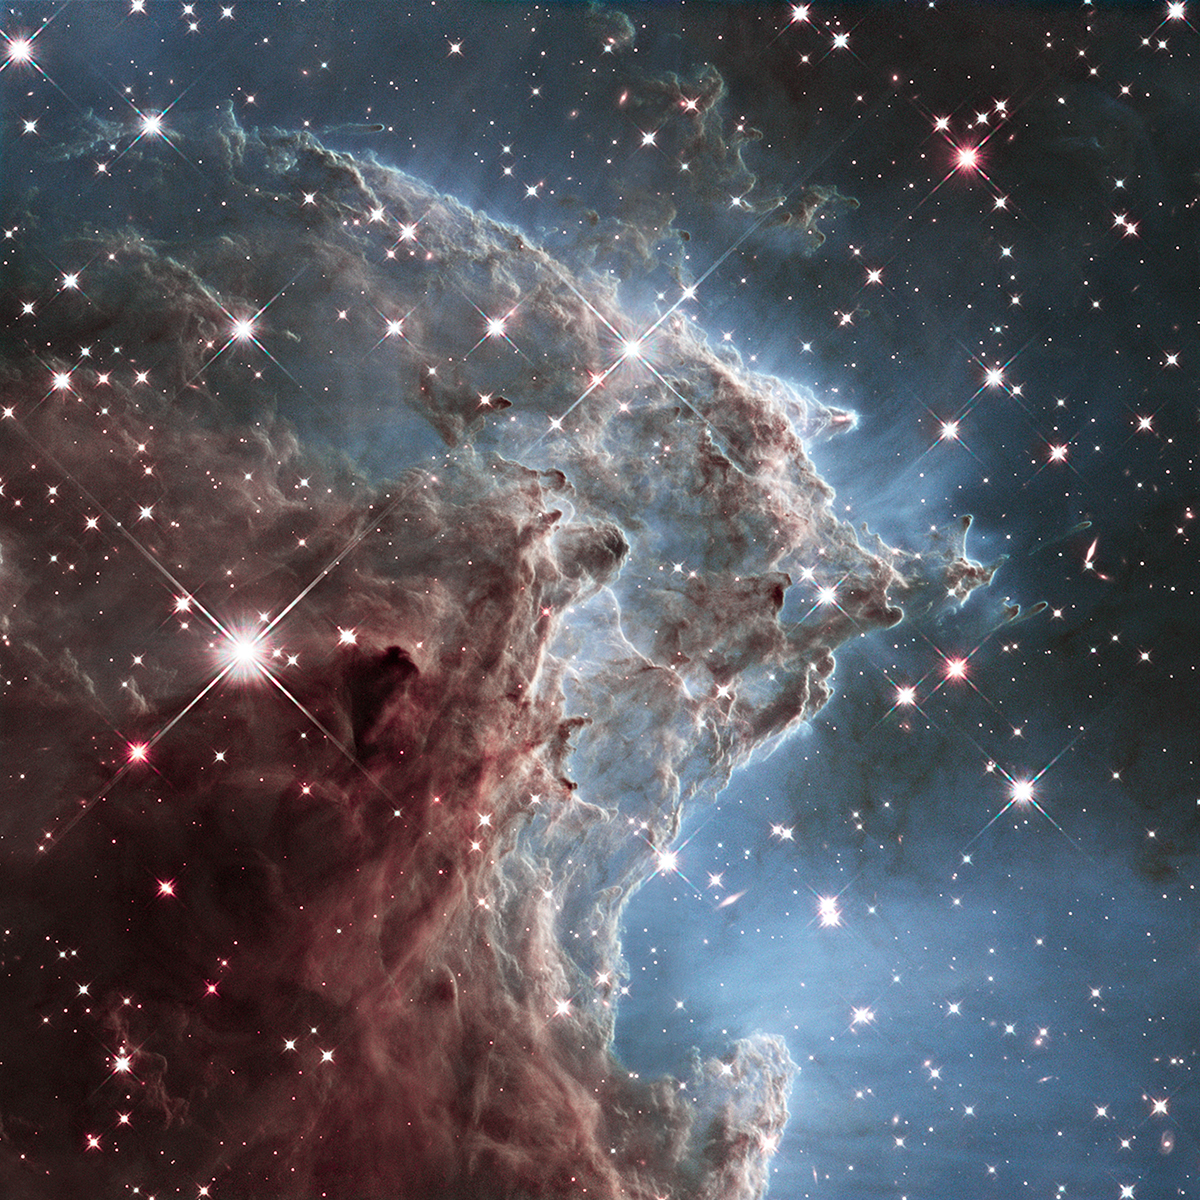 An infrared image of a small portion of the Monkey Head Nebula (also known as NGC 2174 and Sharpless Sh2-252) captured by the Hubble telescope, released on March 17, 2014. The nebula is a star-forming region that hosts dusky dust clouds silhouetted against glowing gas. (NASA/ESA/Hubble Heritage Team (STScI/AURA))